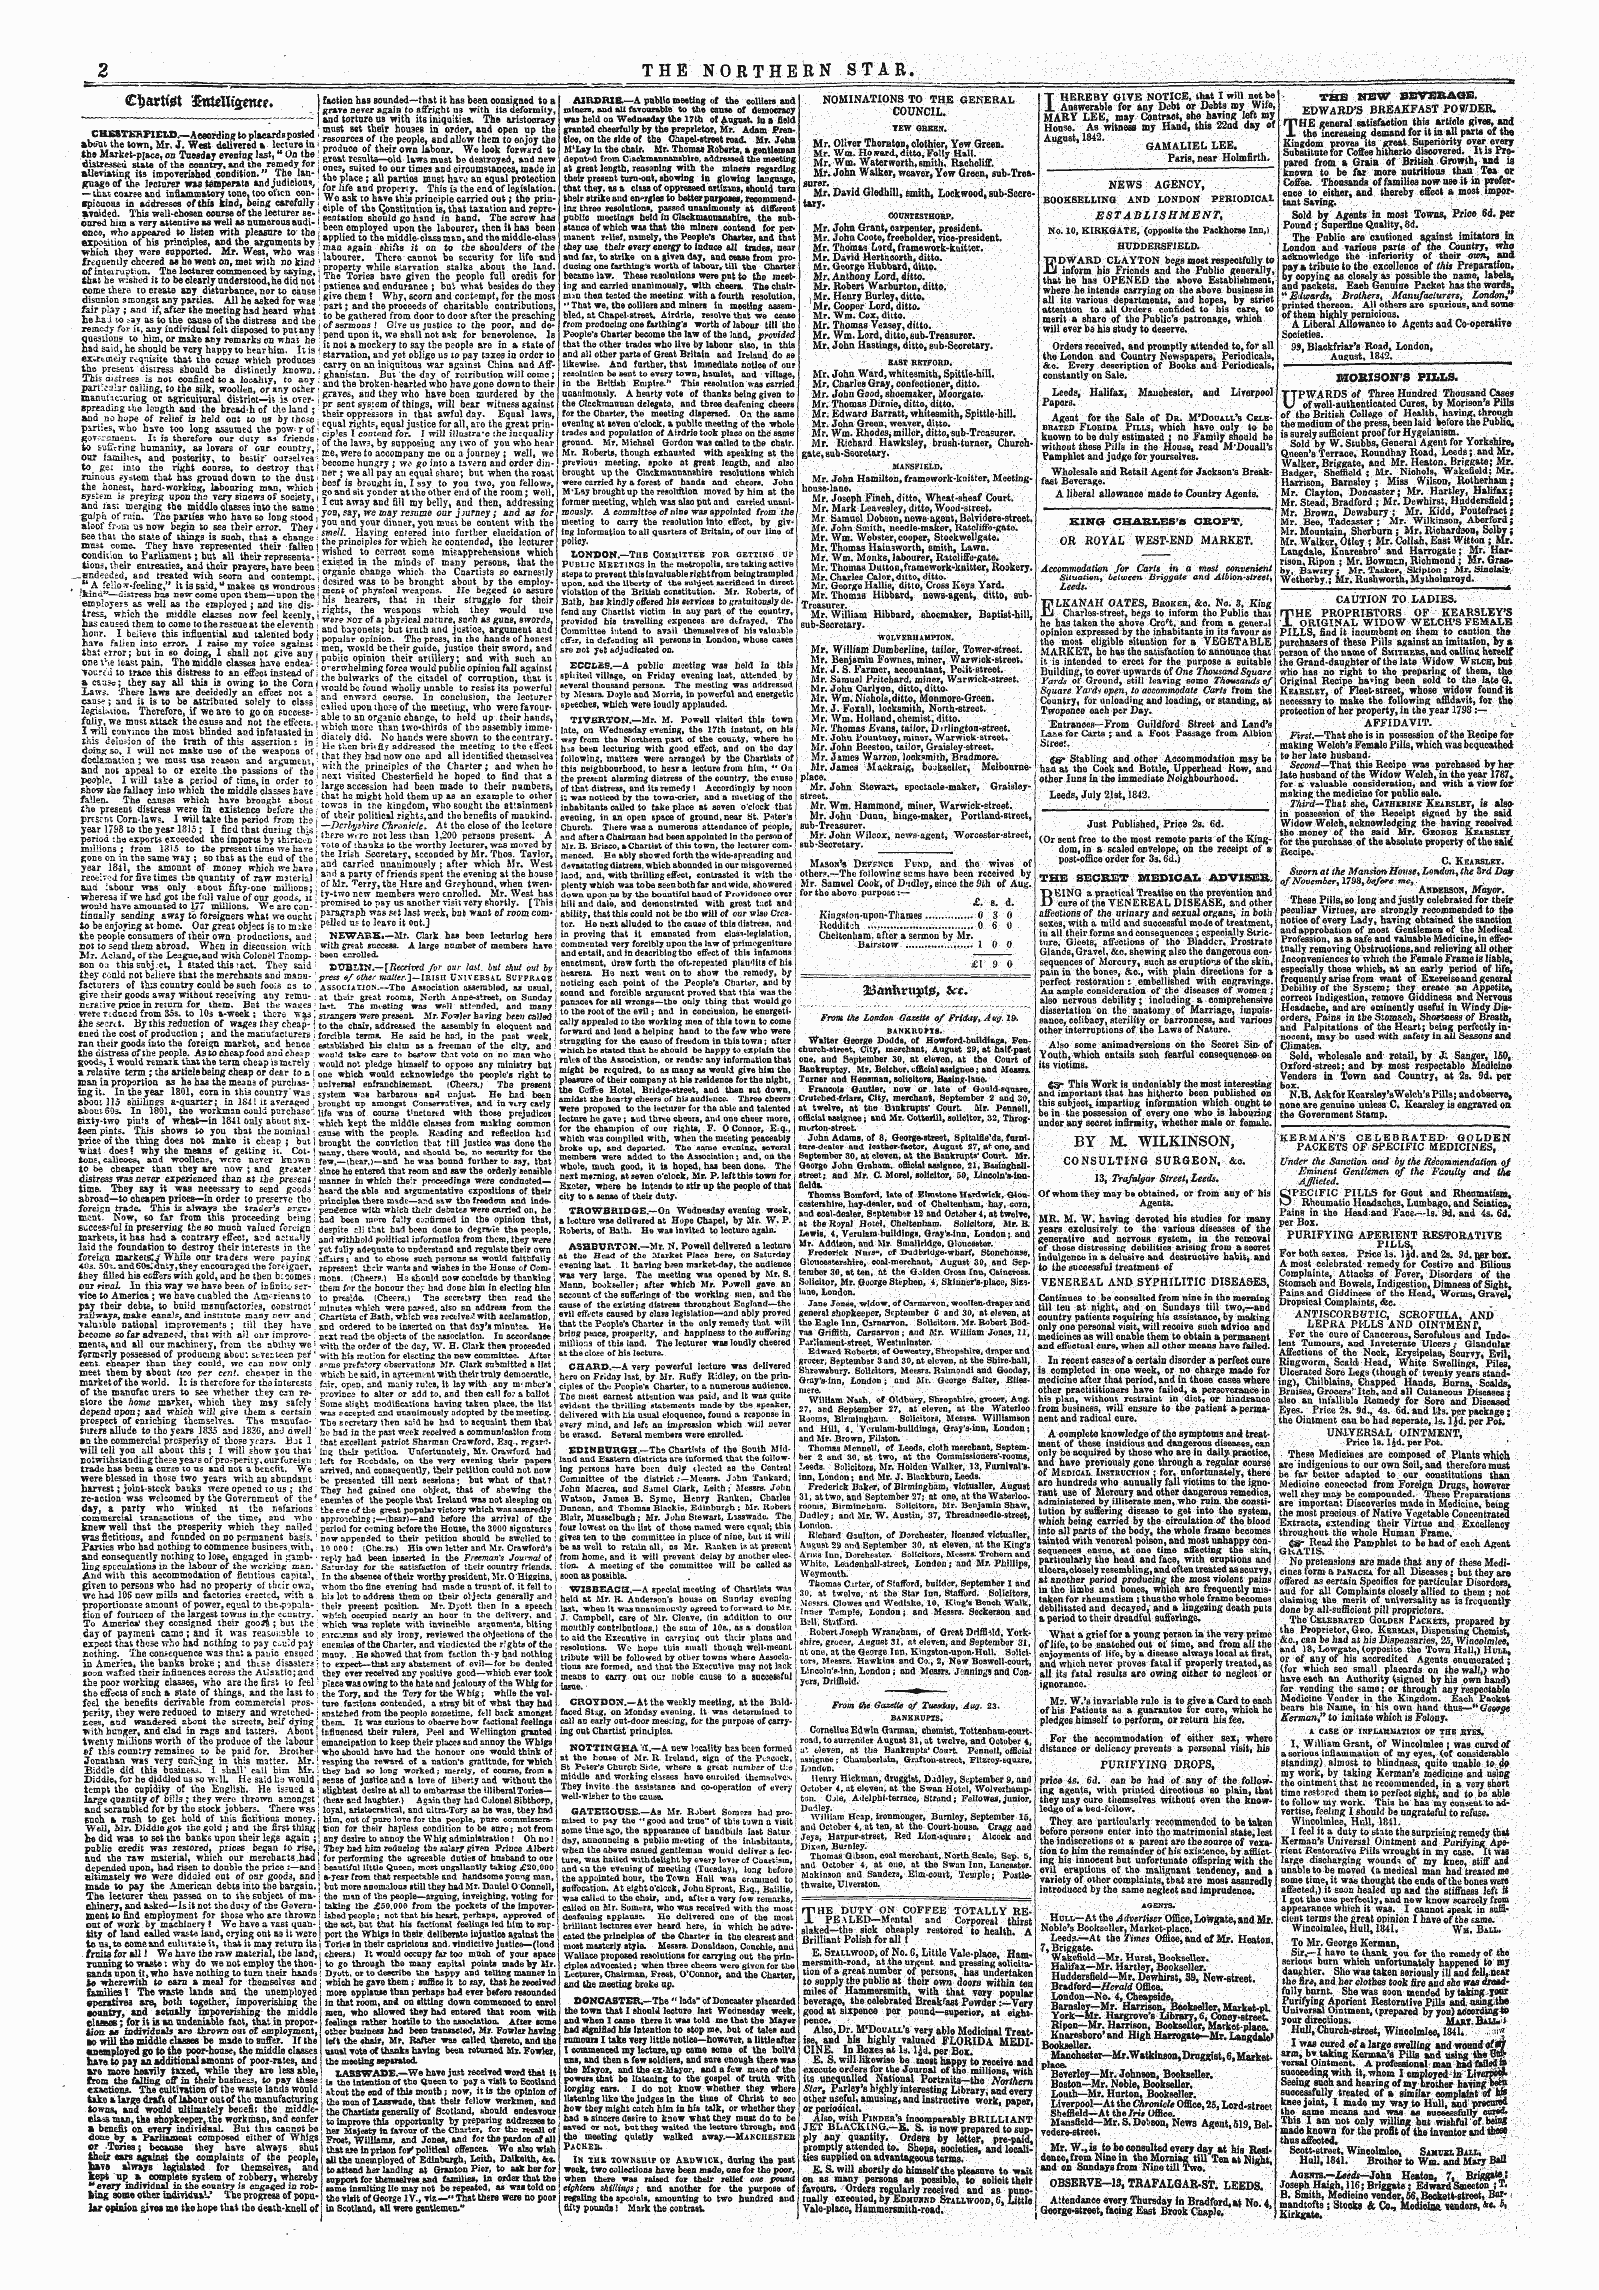 Northern Star (1837-1852): jS F Y, 5th edition - ^Aritenjptp, : &C.\ From The London Gazette Of Friday, Aug. W.